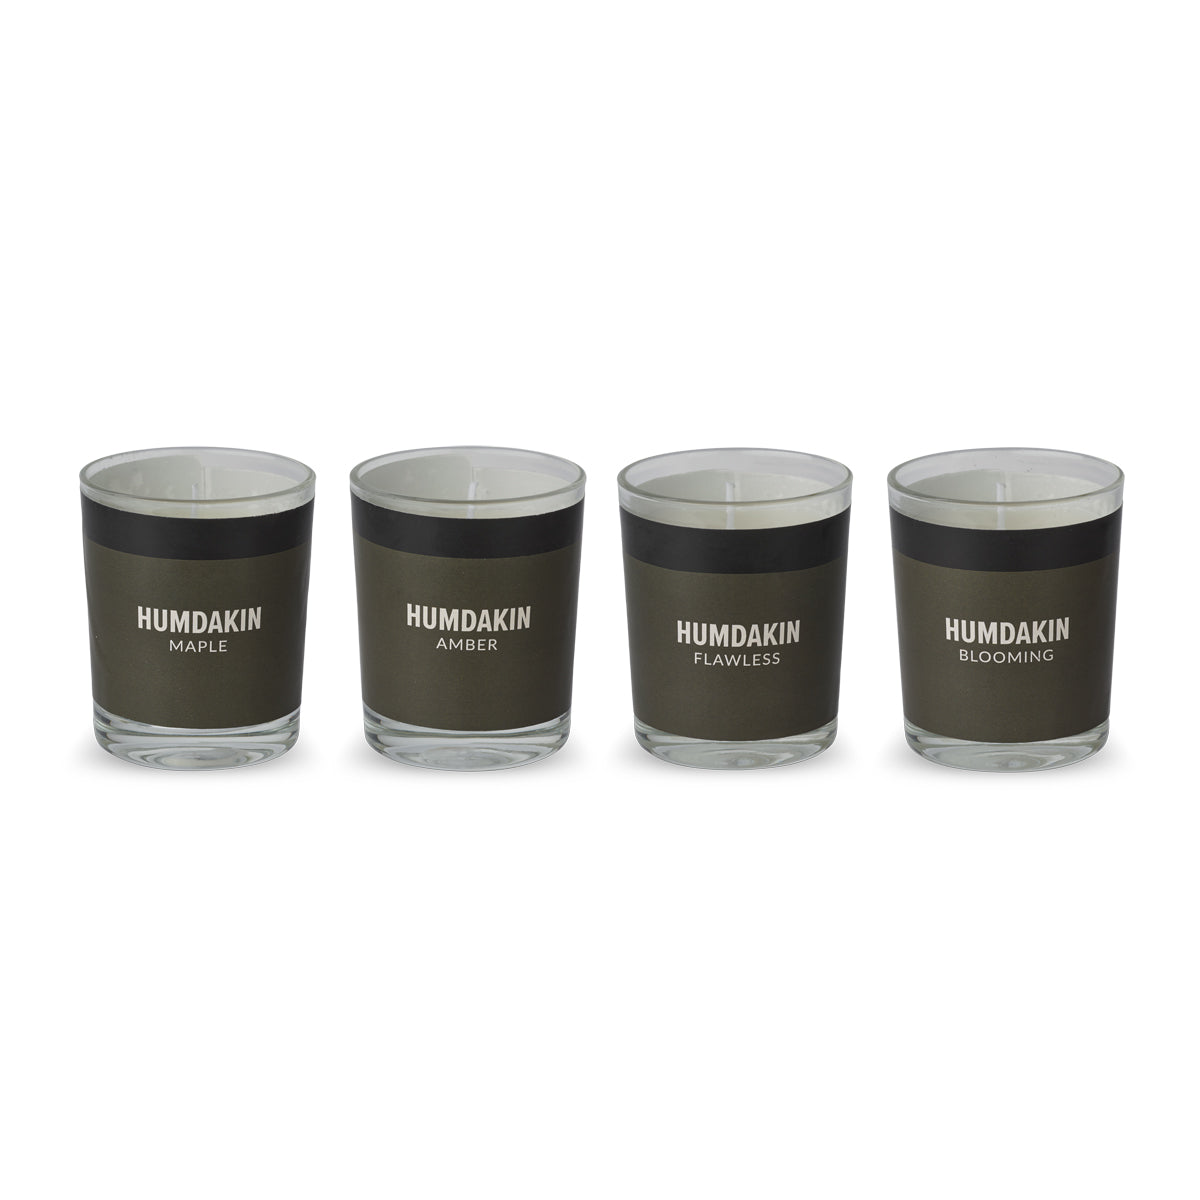 HUMDAKIN "Hygge and Authentic " - Scented Candles - 4 pack Candle